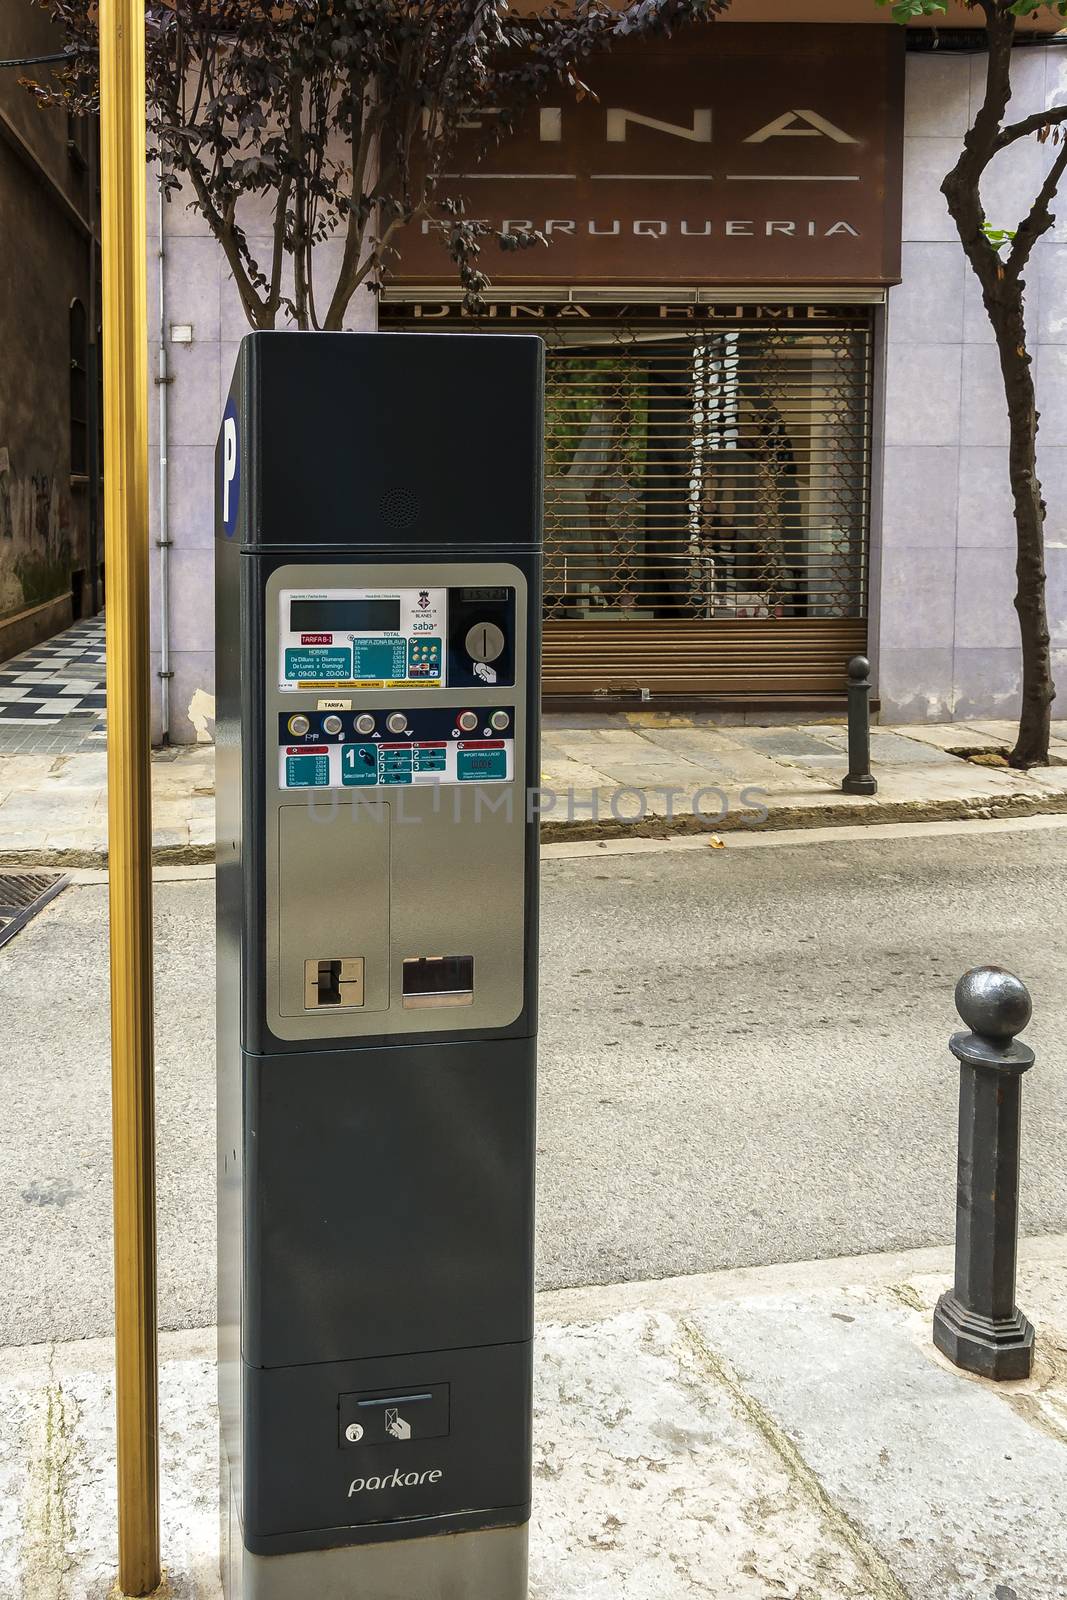 Spain, Blanes - 14.09.2017: A device for collecting money for parking (Blanes, Spain)